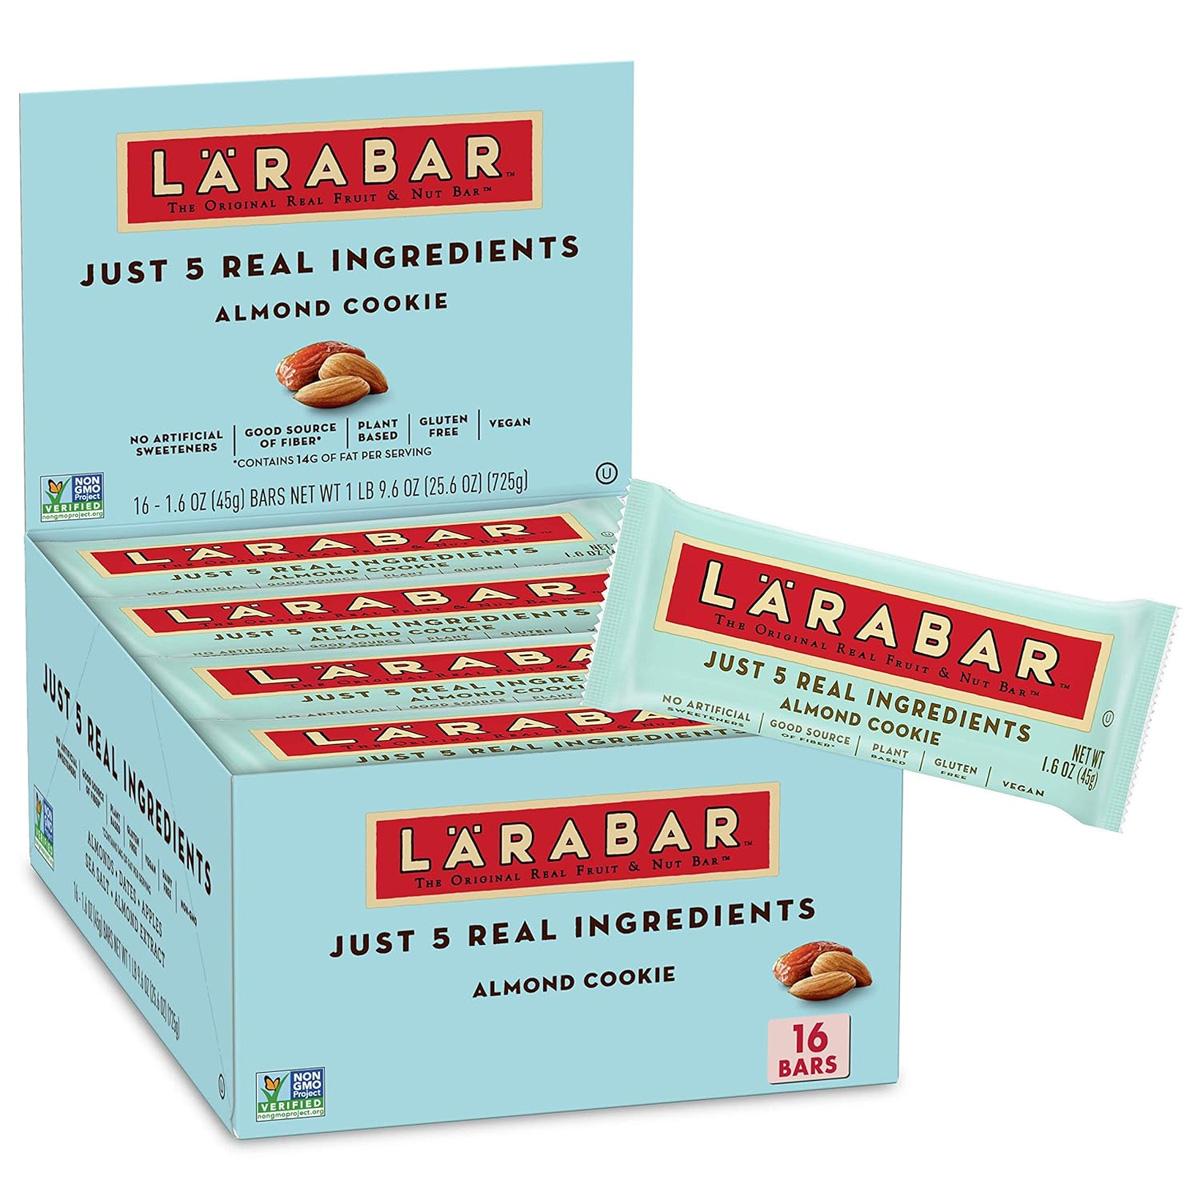 Larabar Almond Cookie Vegan Fruits and Nut Bars 16 Pack for $14.82